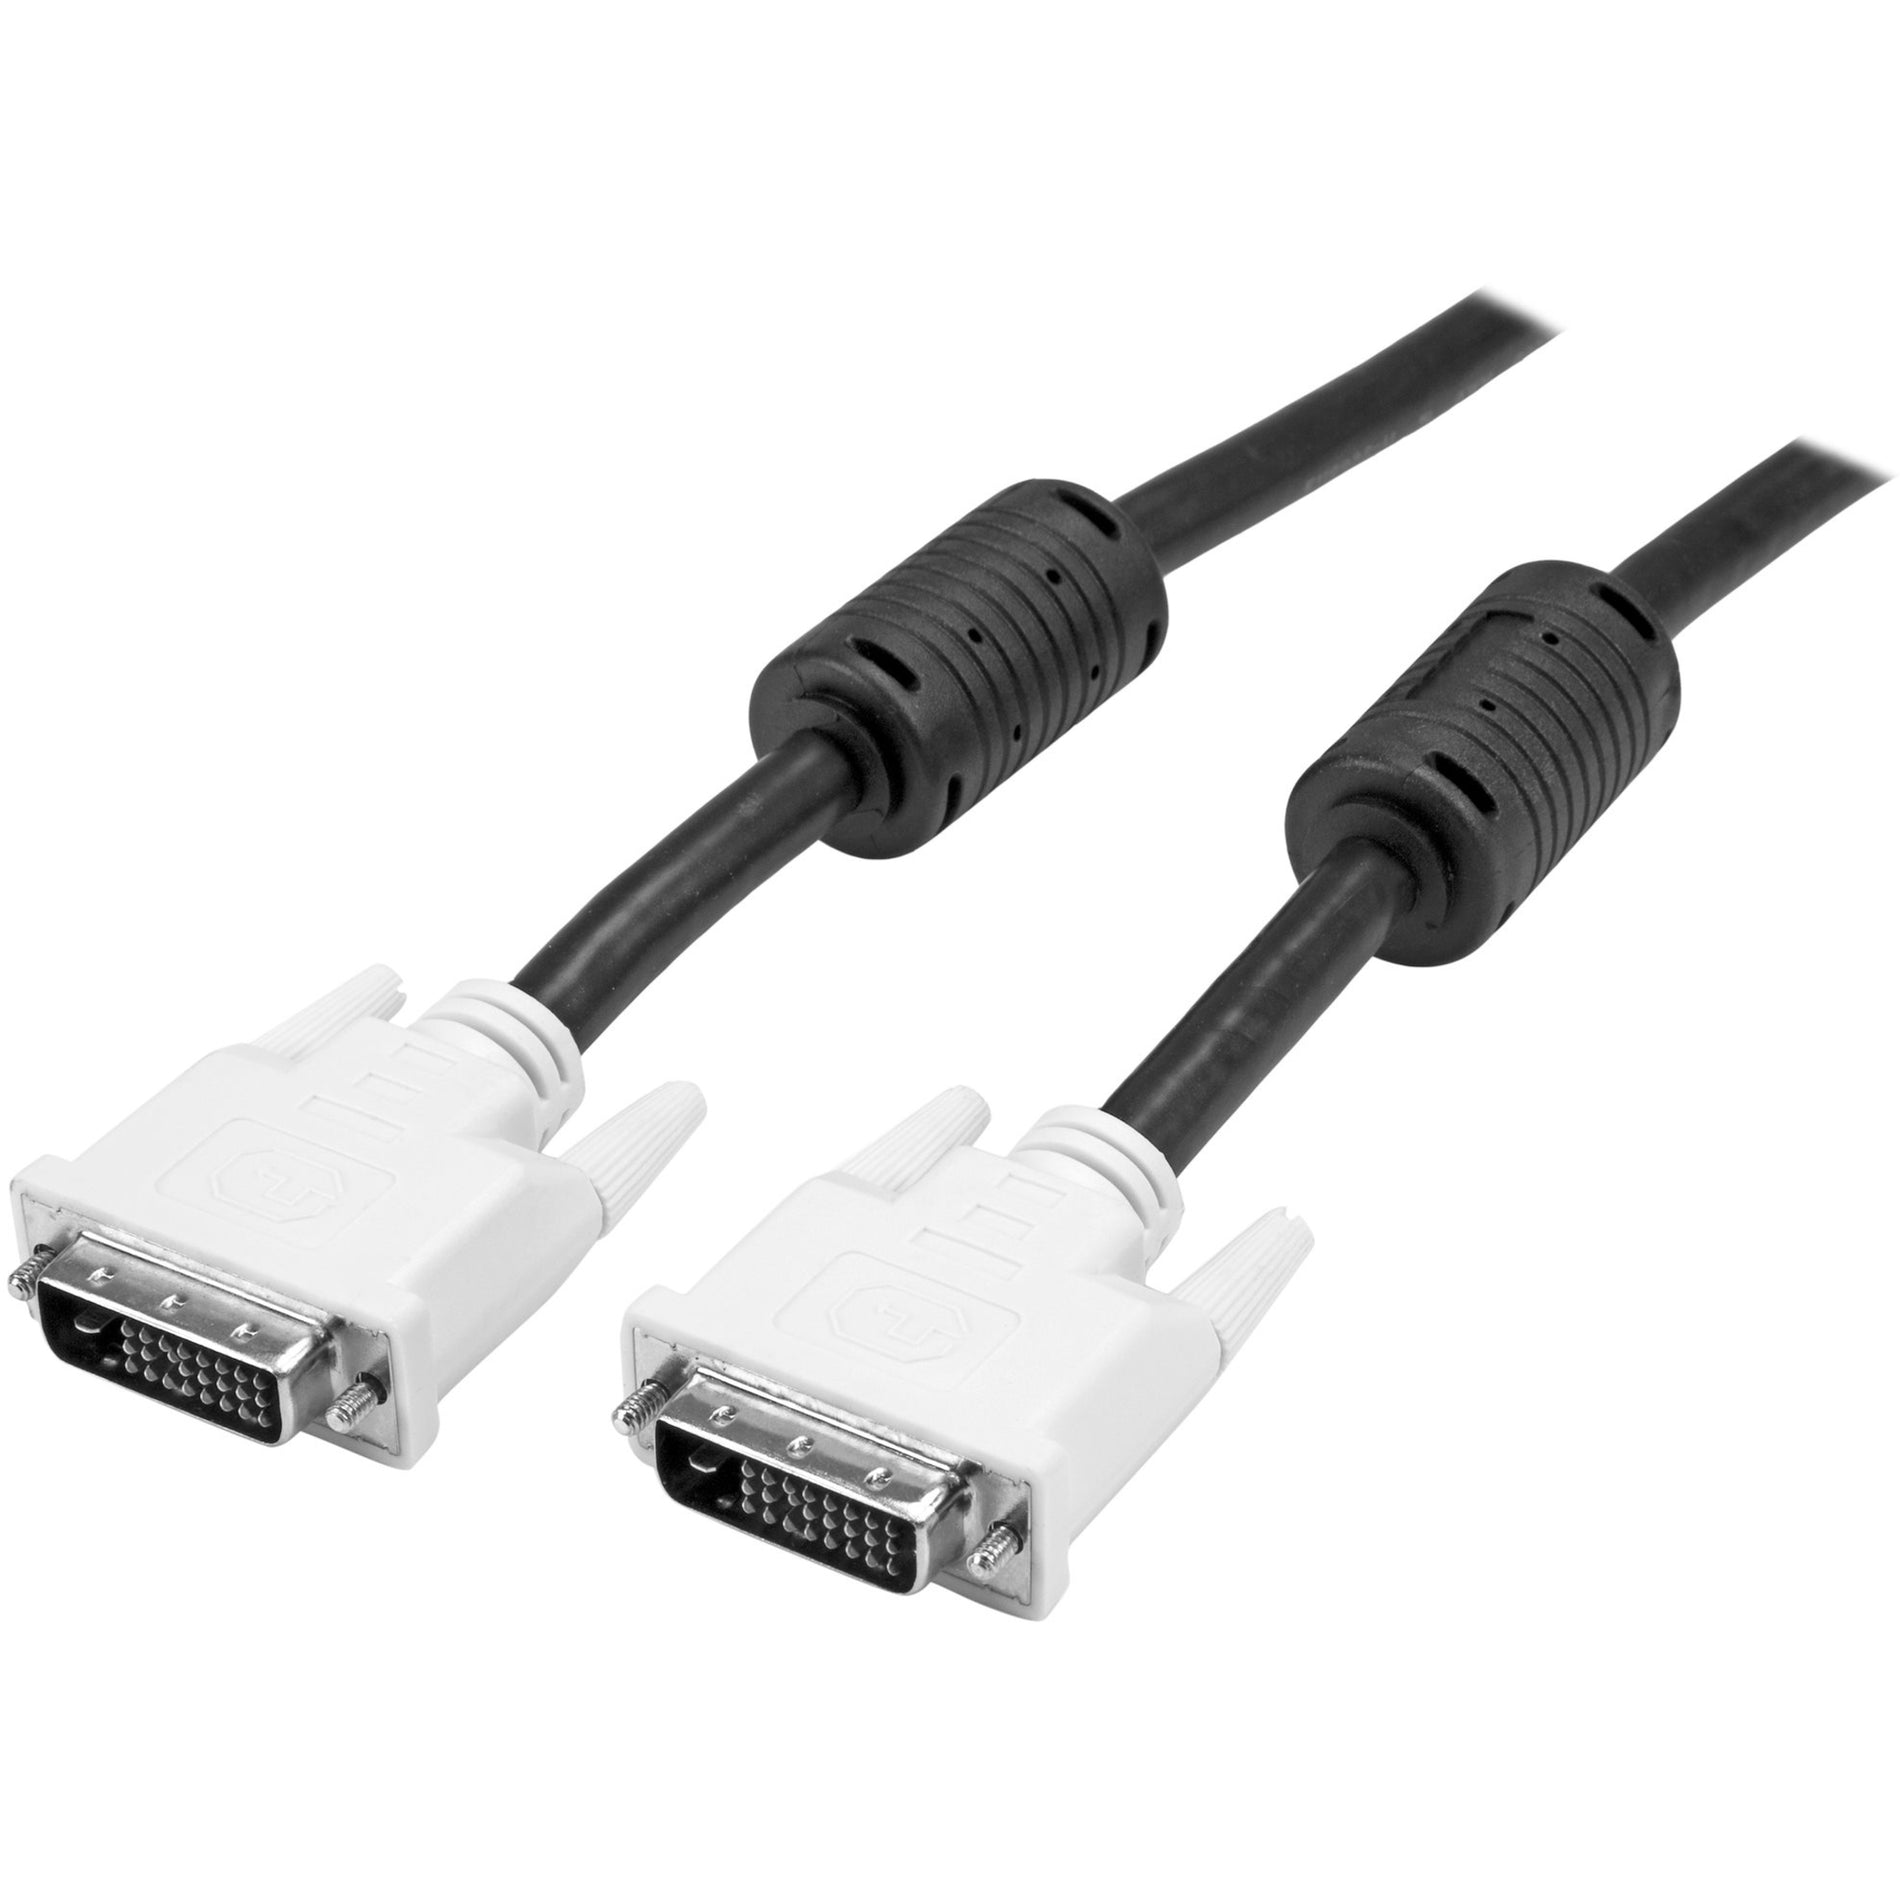 StarTech.com DVIDDMM6 6 ft DVI-D Dual Link Cable - M/M, High-Speed Video Cable for Displays, Projectors, HDTVs